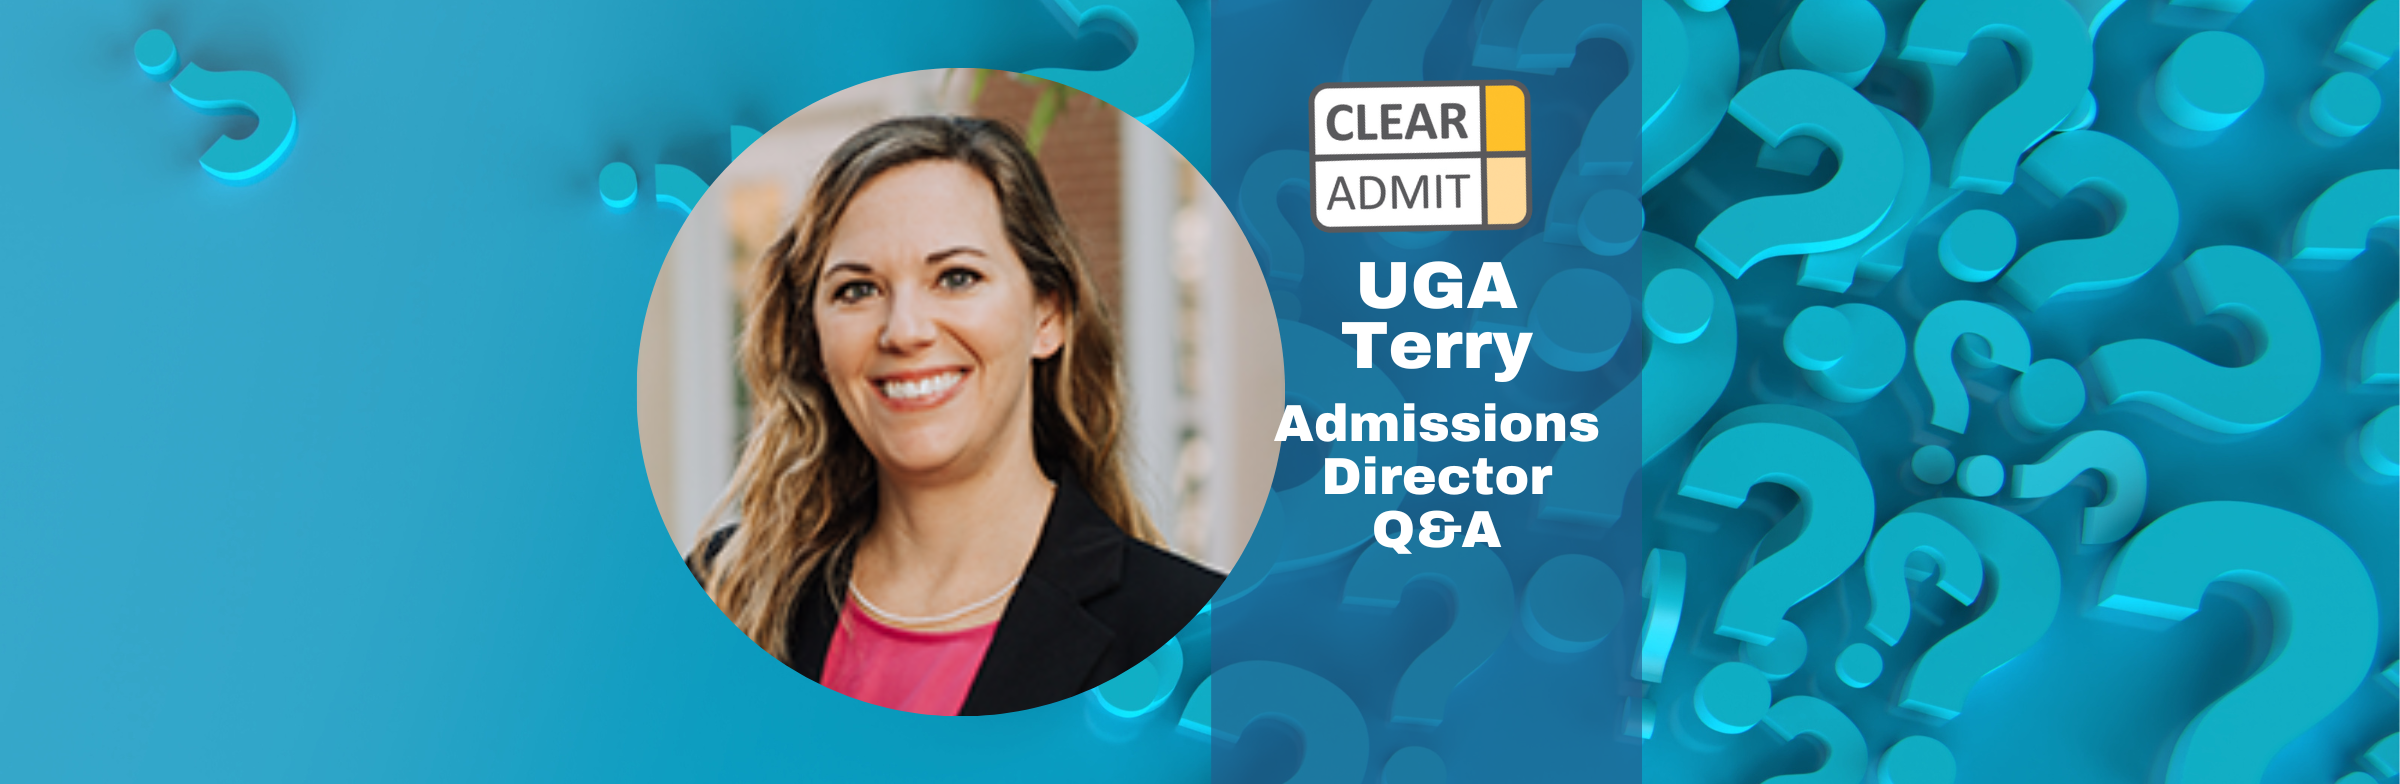 Image for Admissions Director Q&A: Leigh Britton of the University of Georgia Terry College of Business